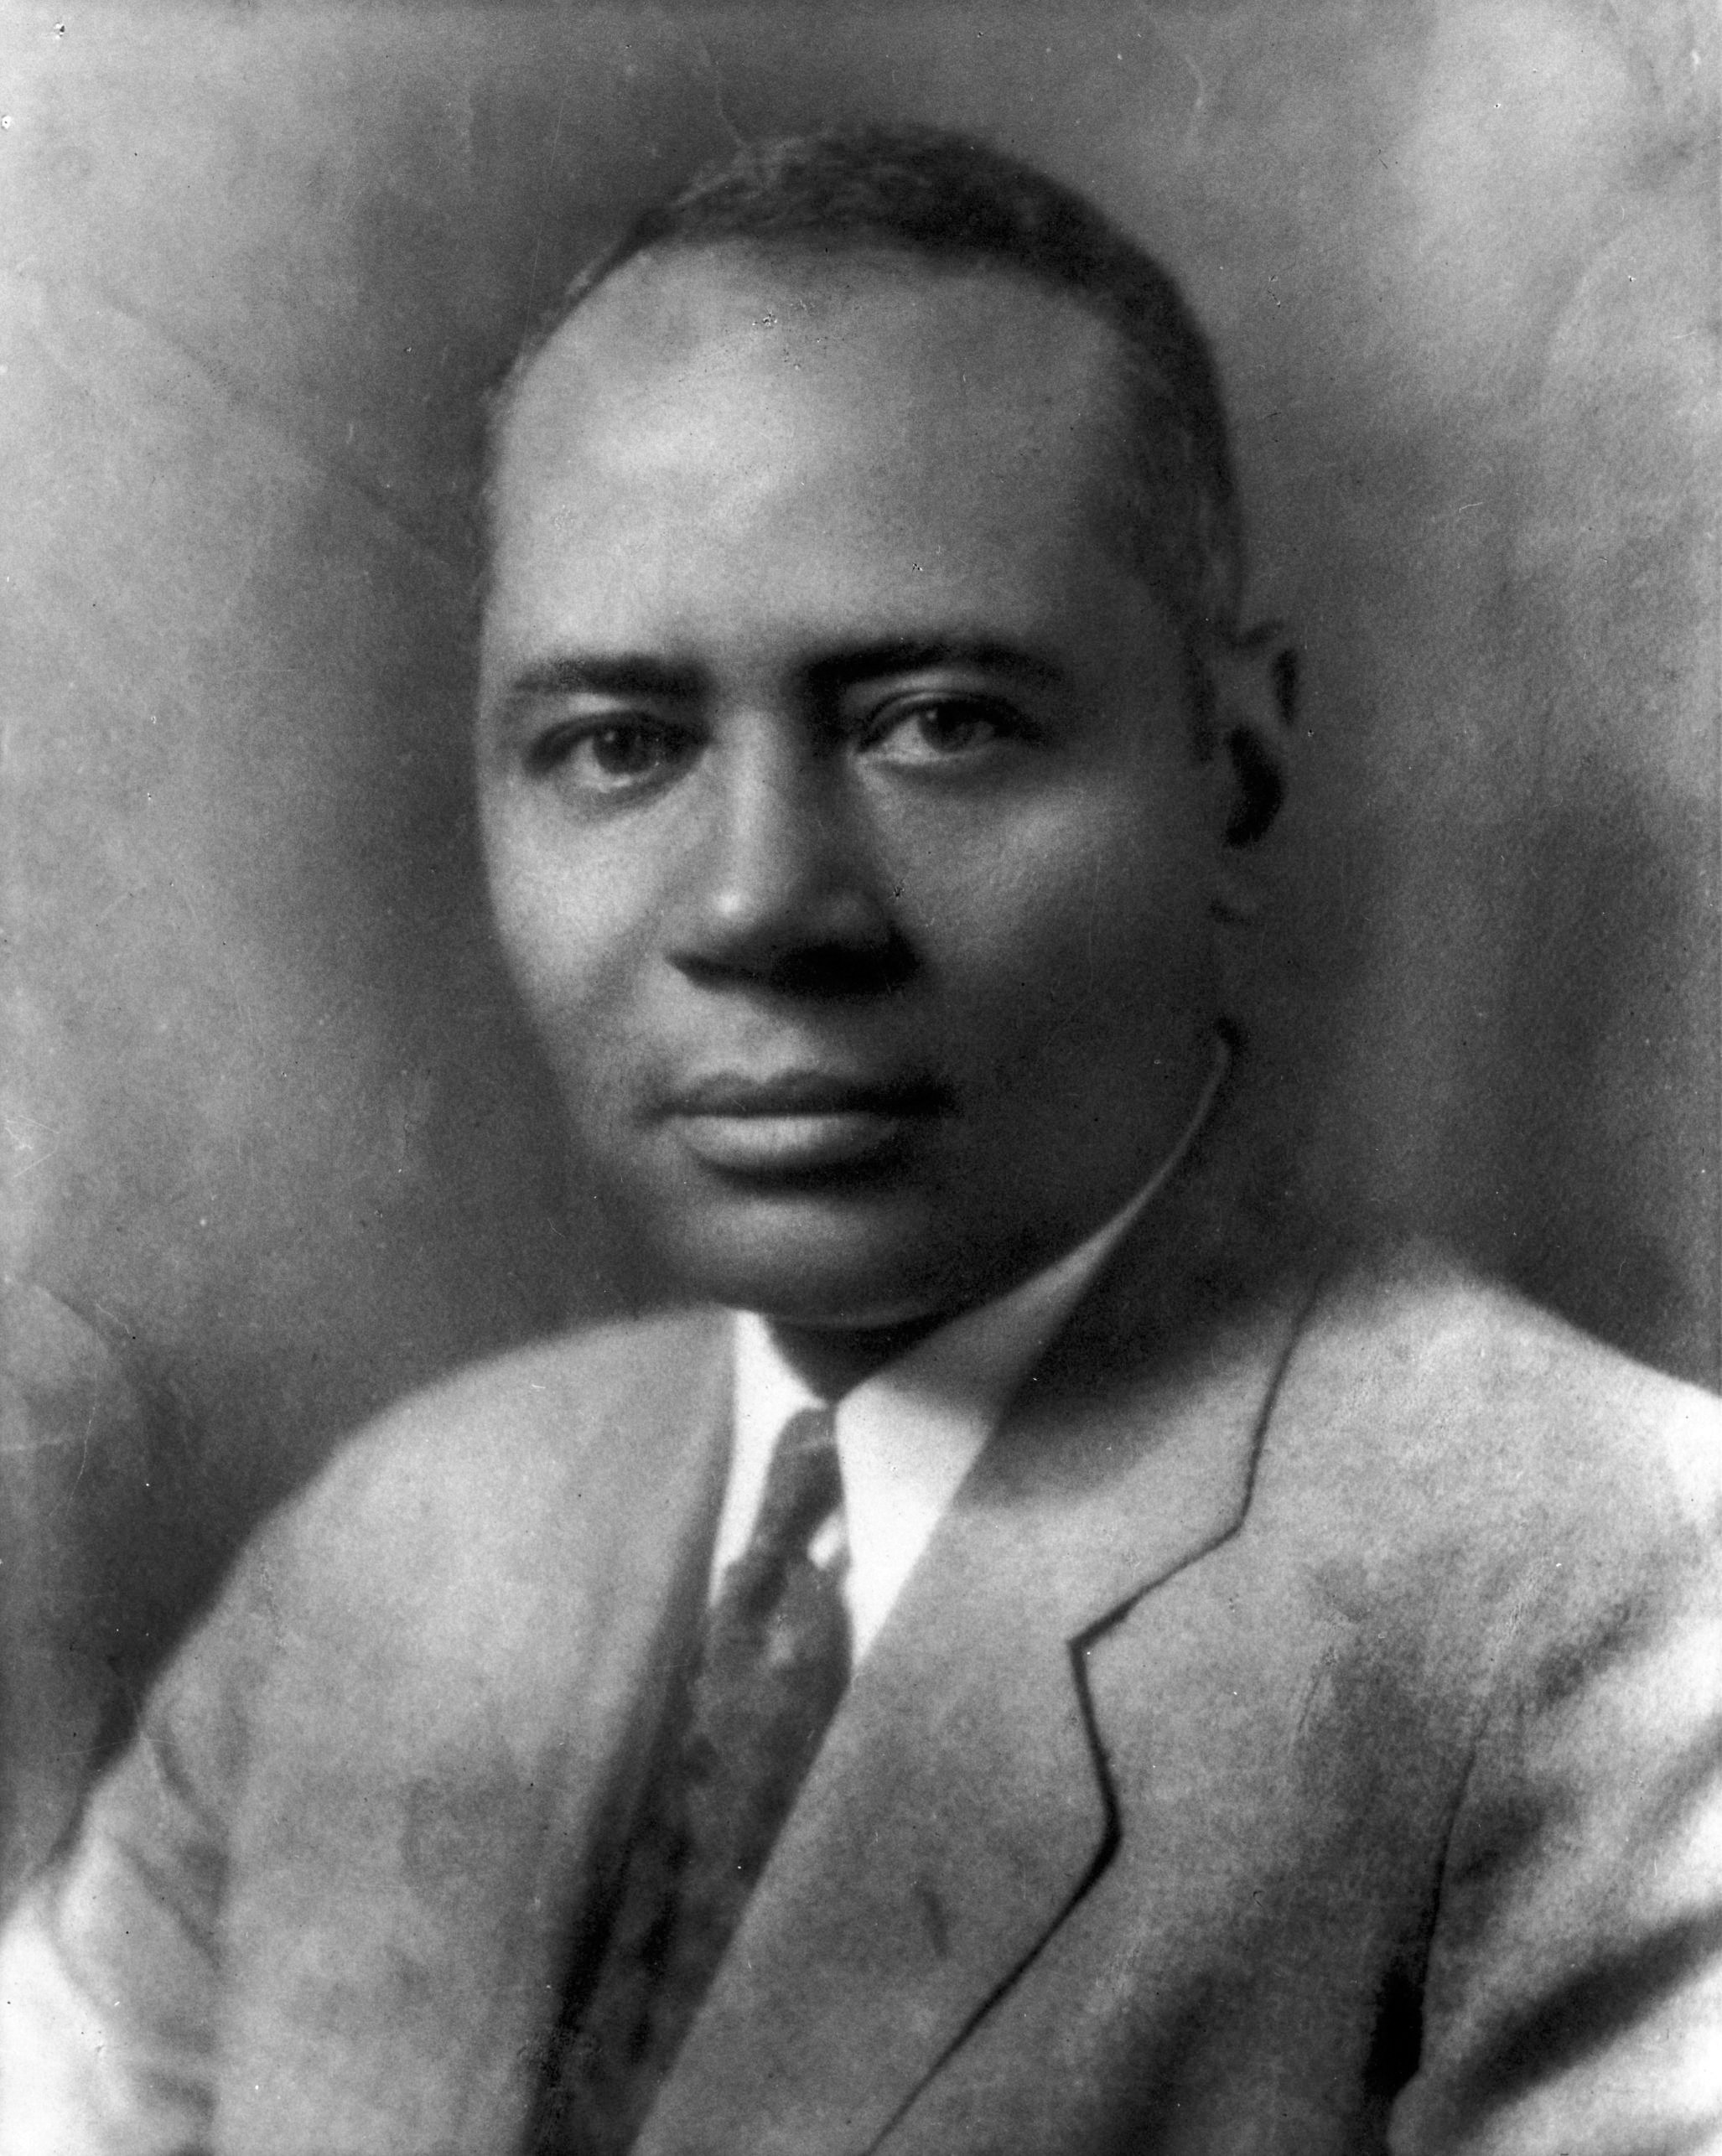 Dark black-and-white head shot of a young Charles Hamilton Houston. He wears a suit and tie and stares directly at the camera.